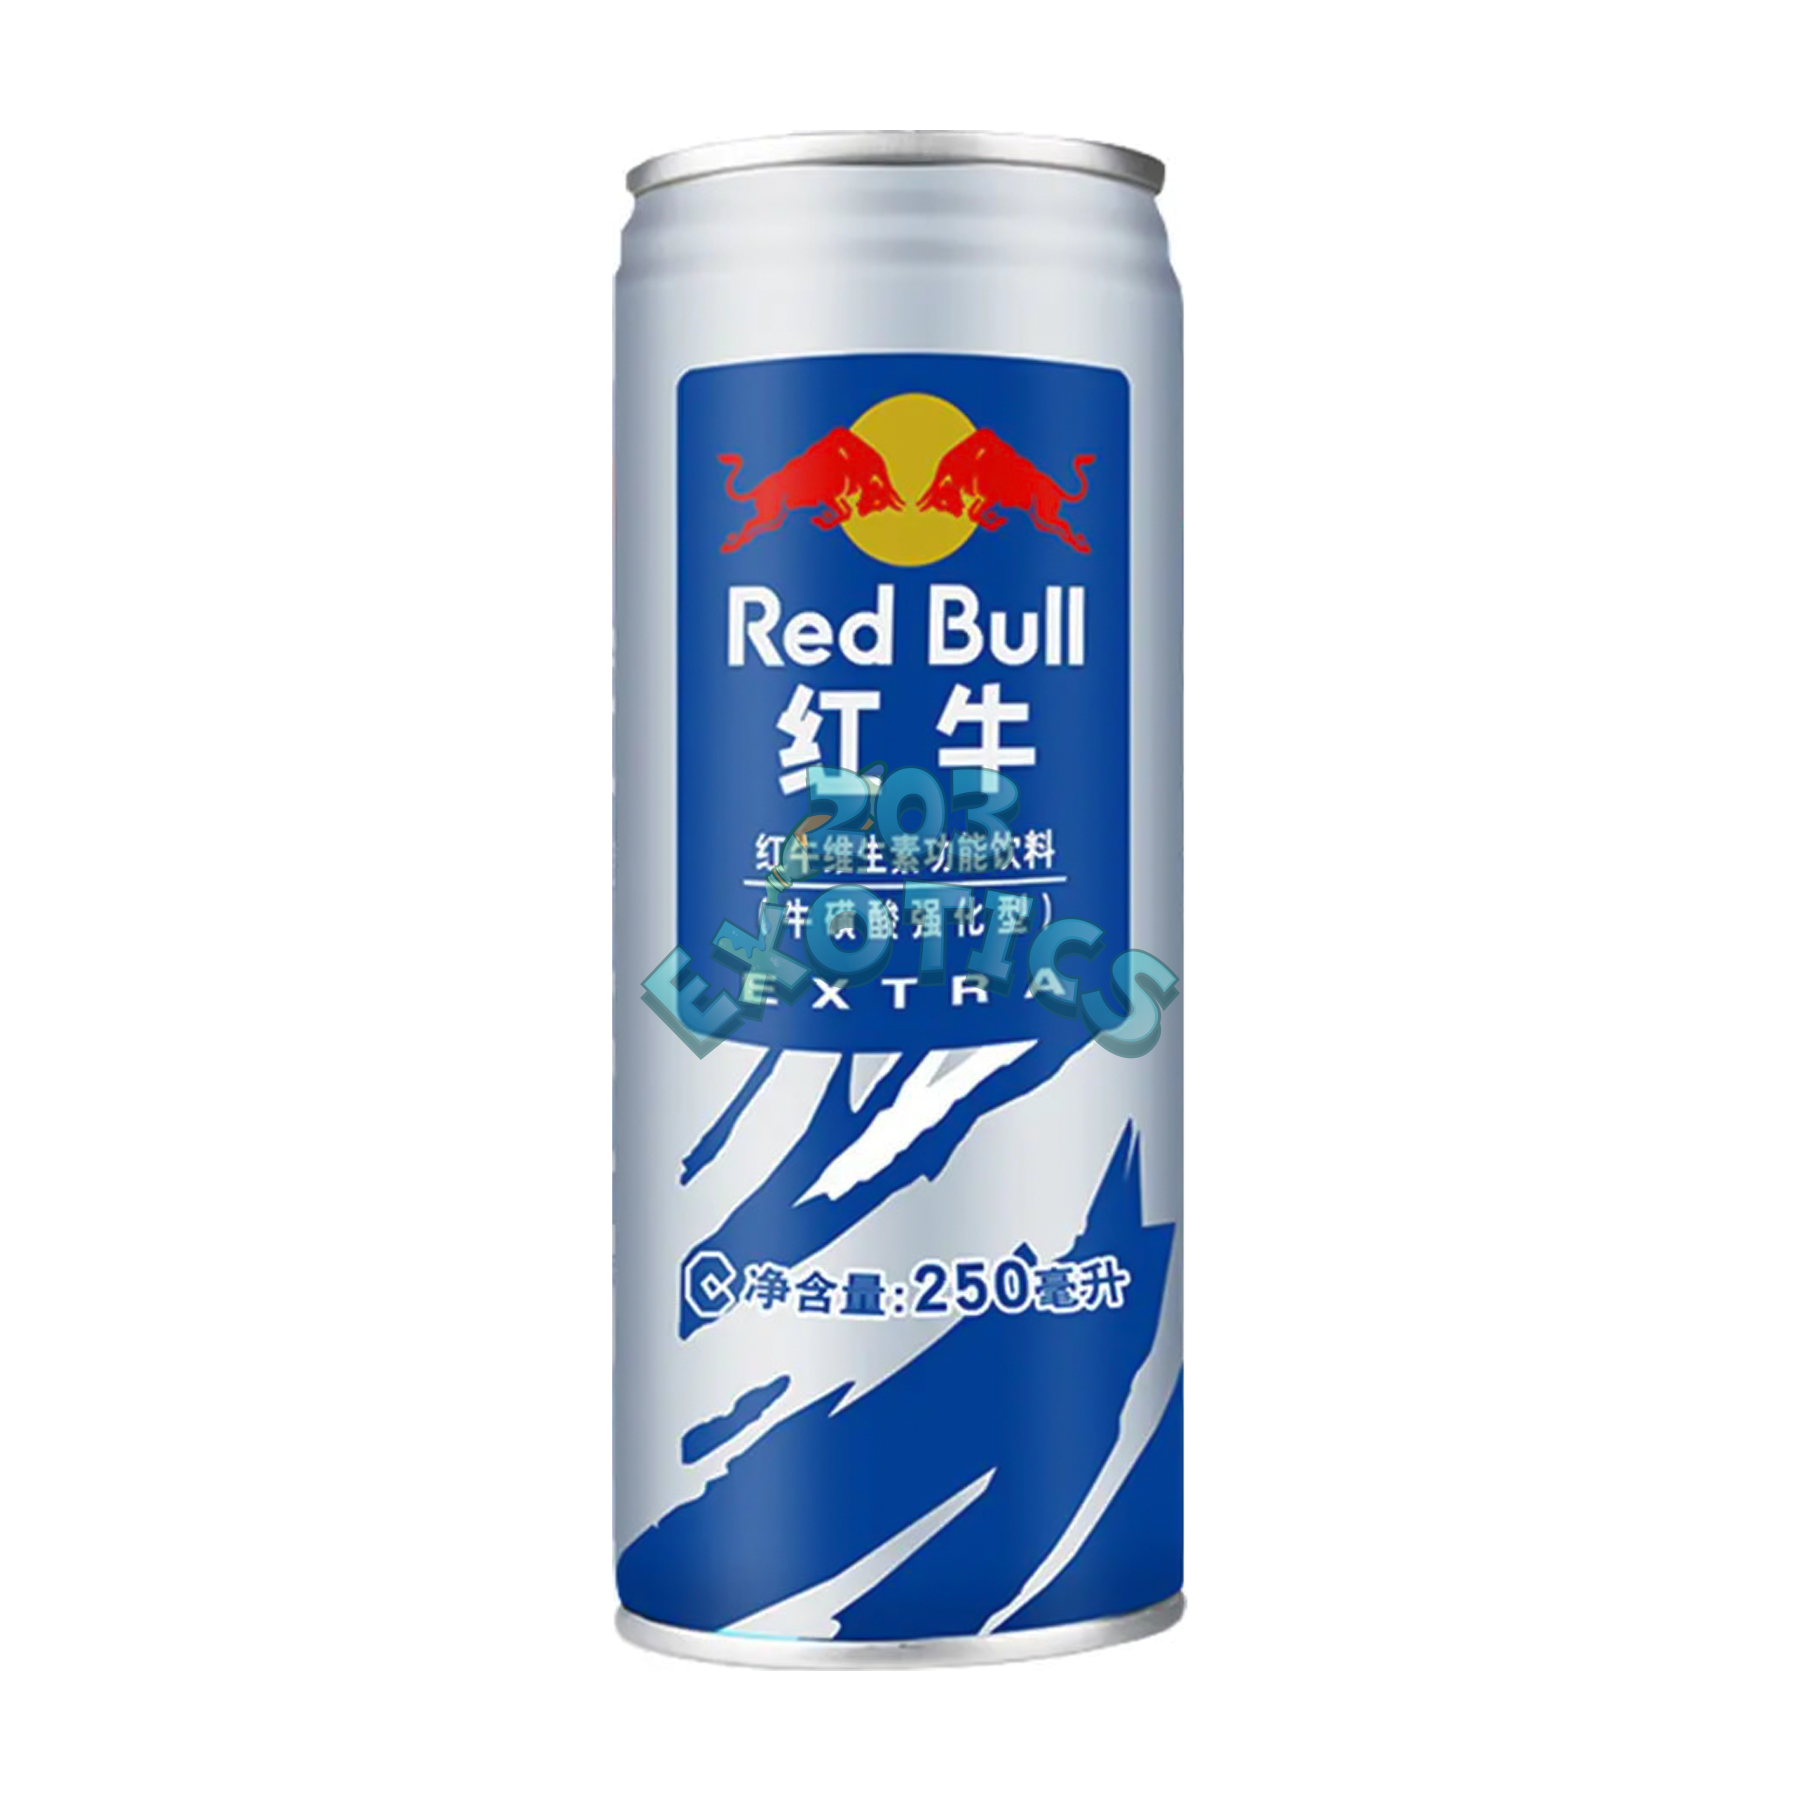 Red Bull Extra (250Ml) Energy Drink